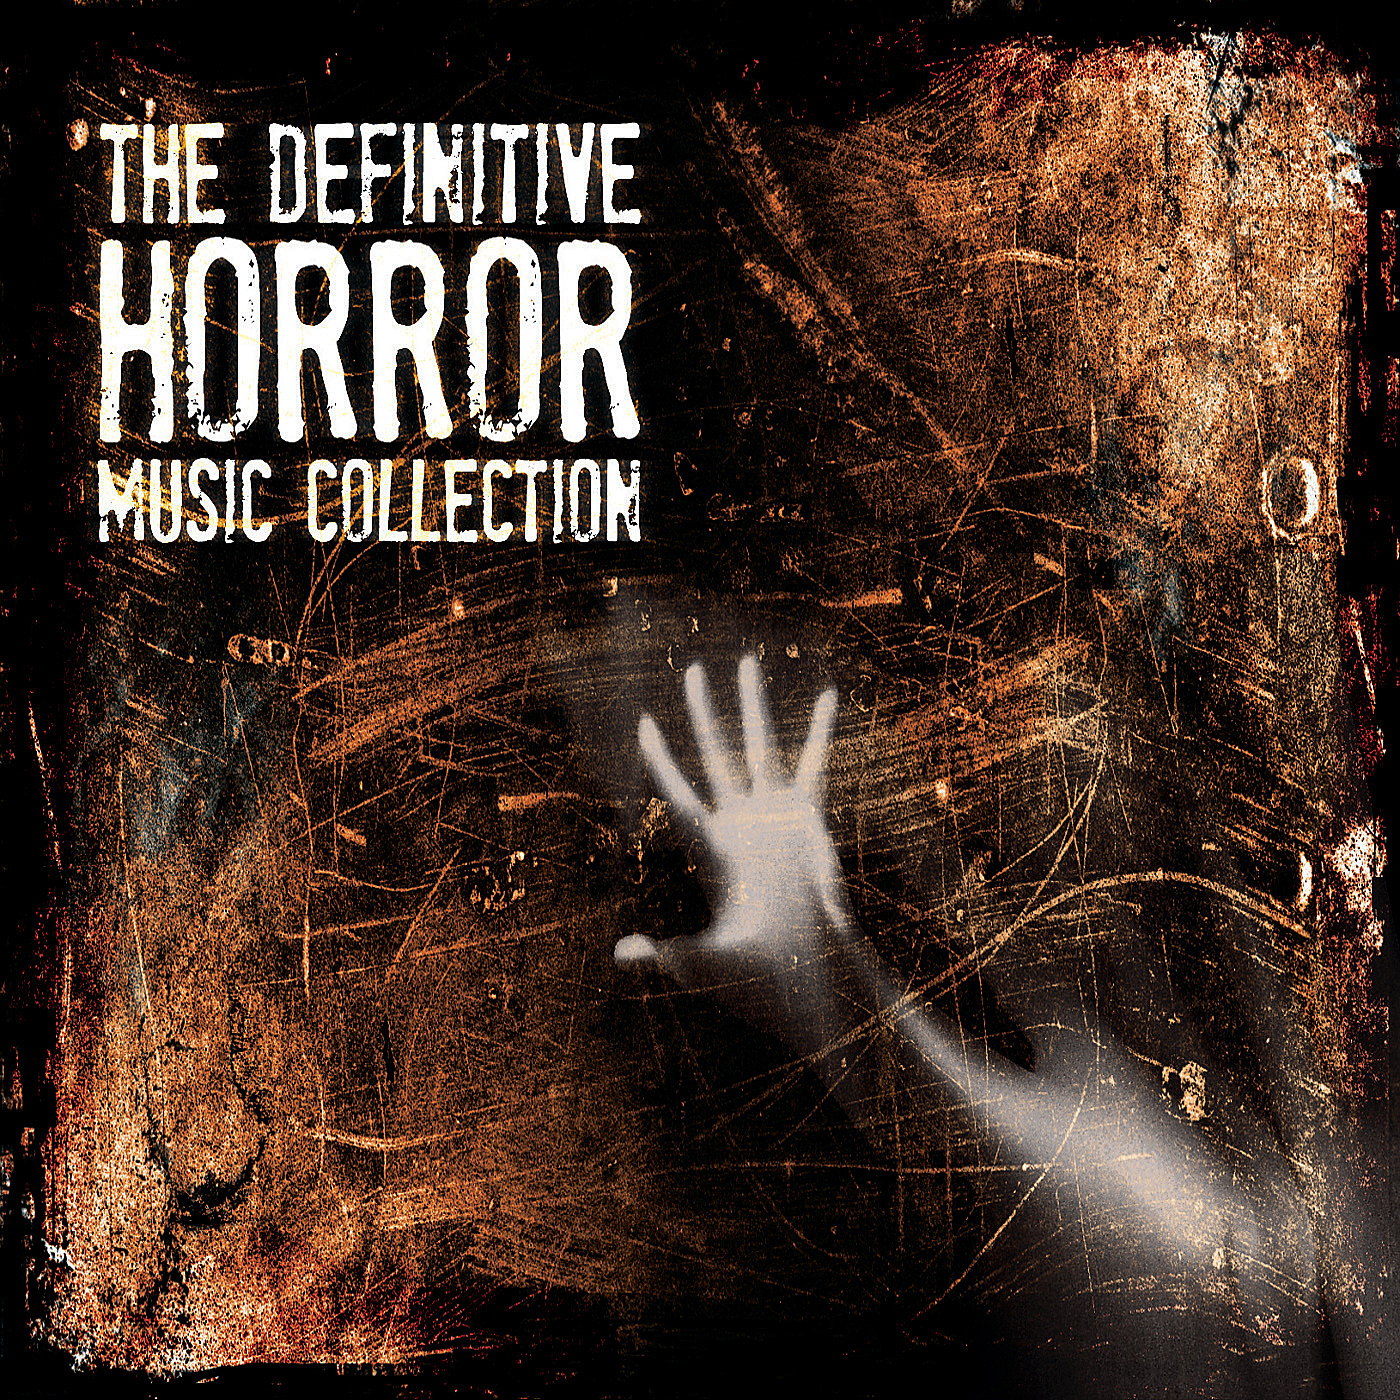 The Definitive Horror Music Collection